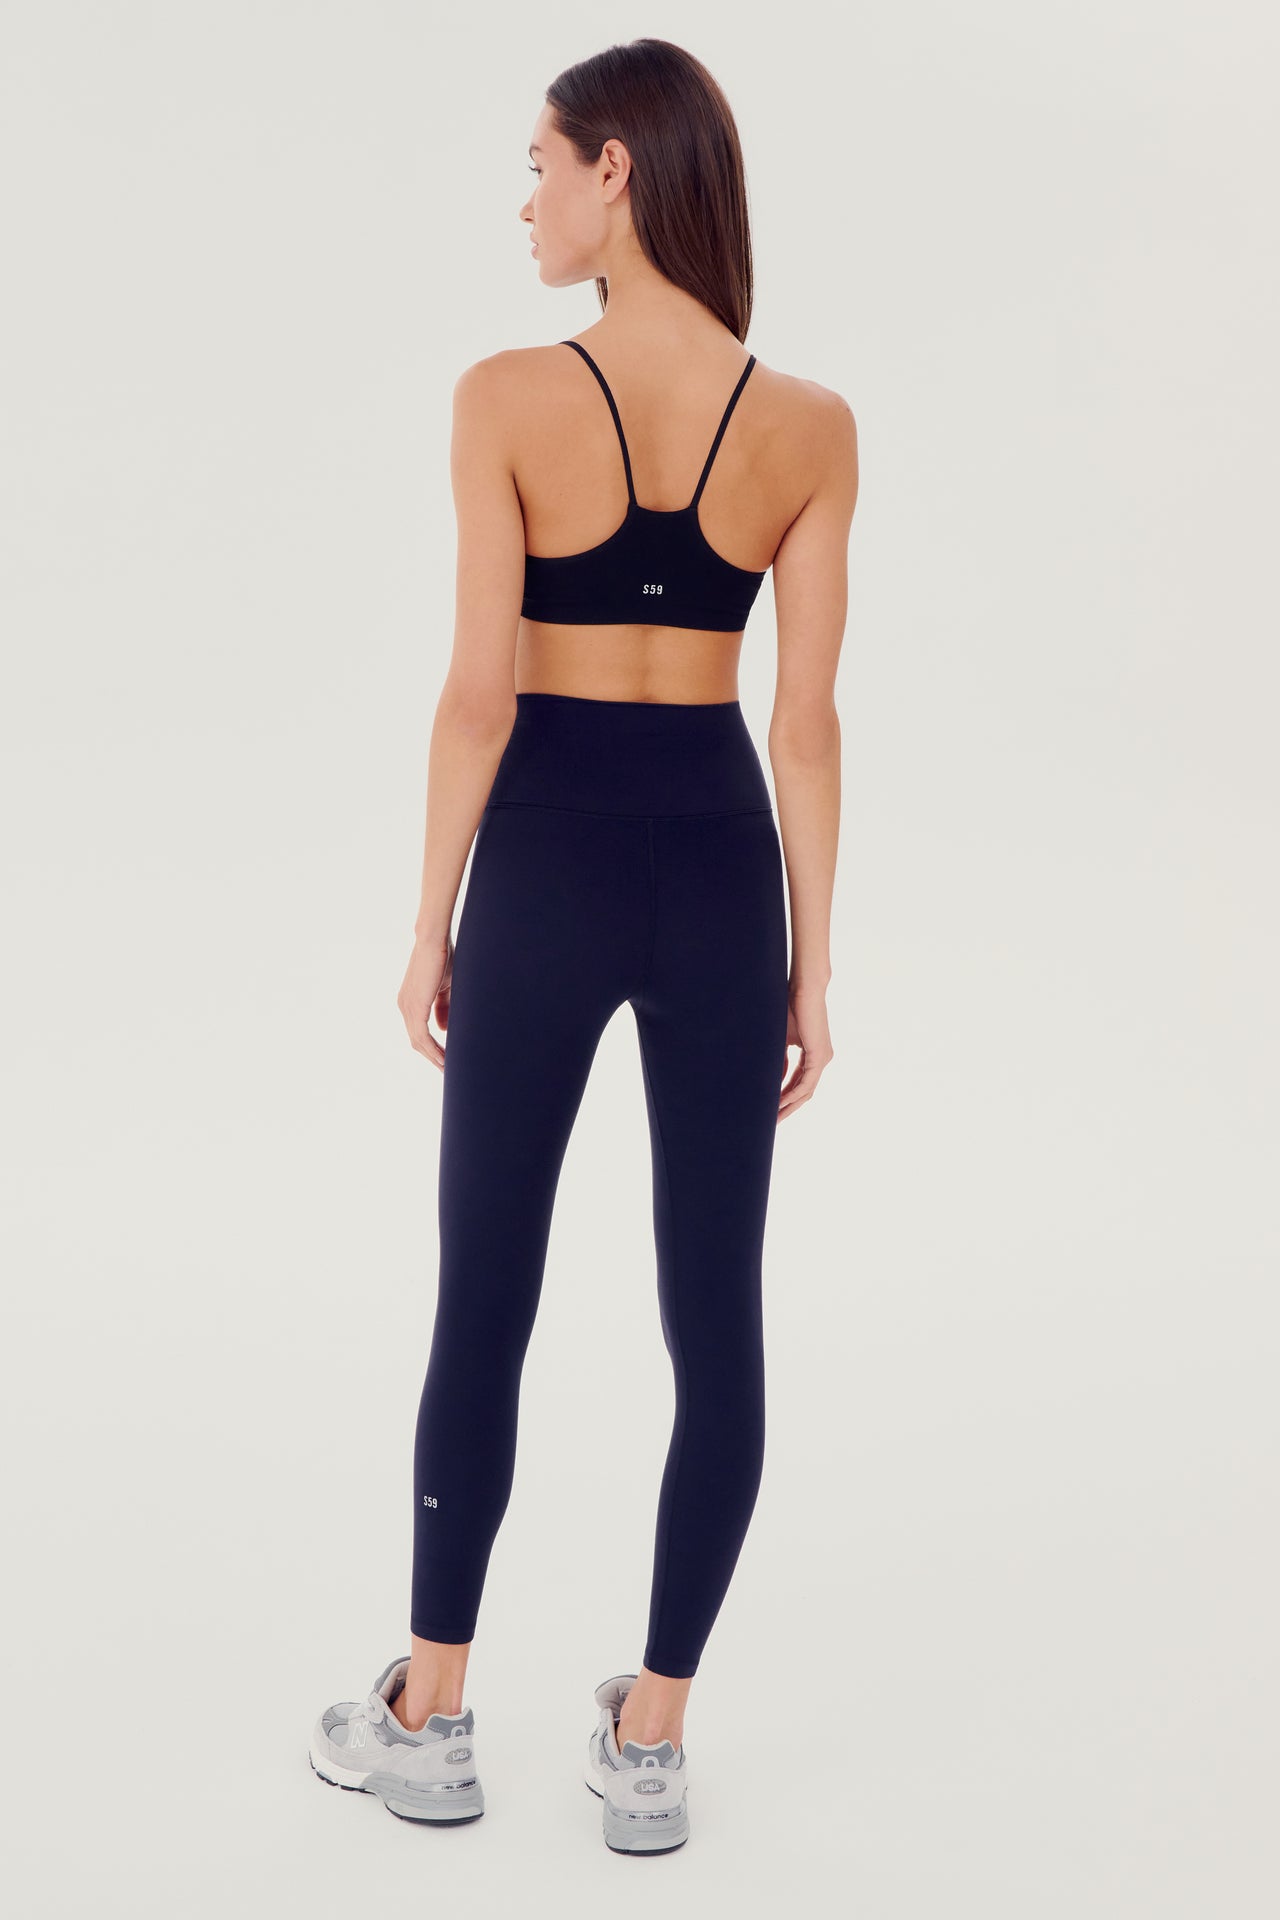 Full back view of girl wearing dark blue leggings right above the ankle with dark blue sports bra grey shoes